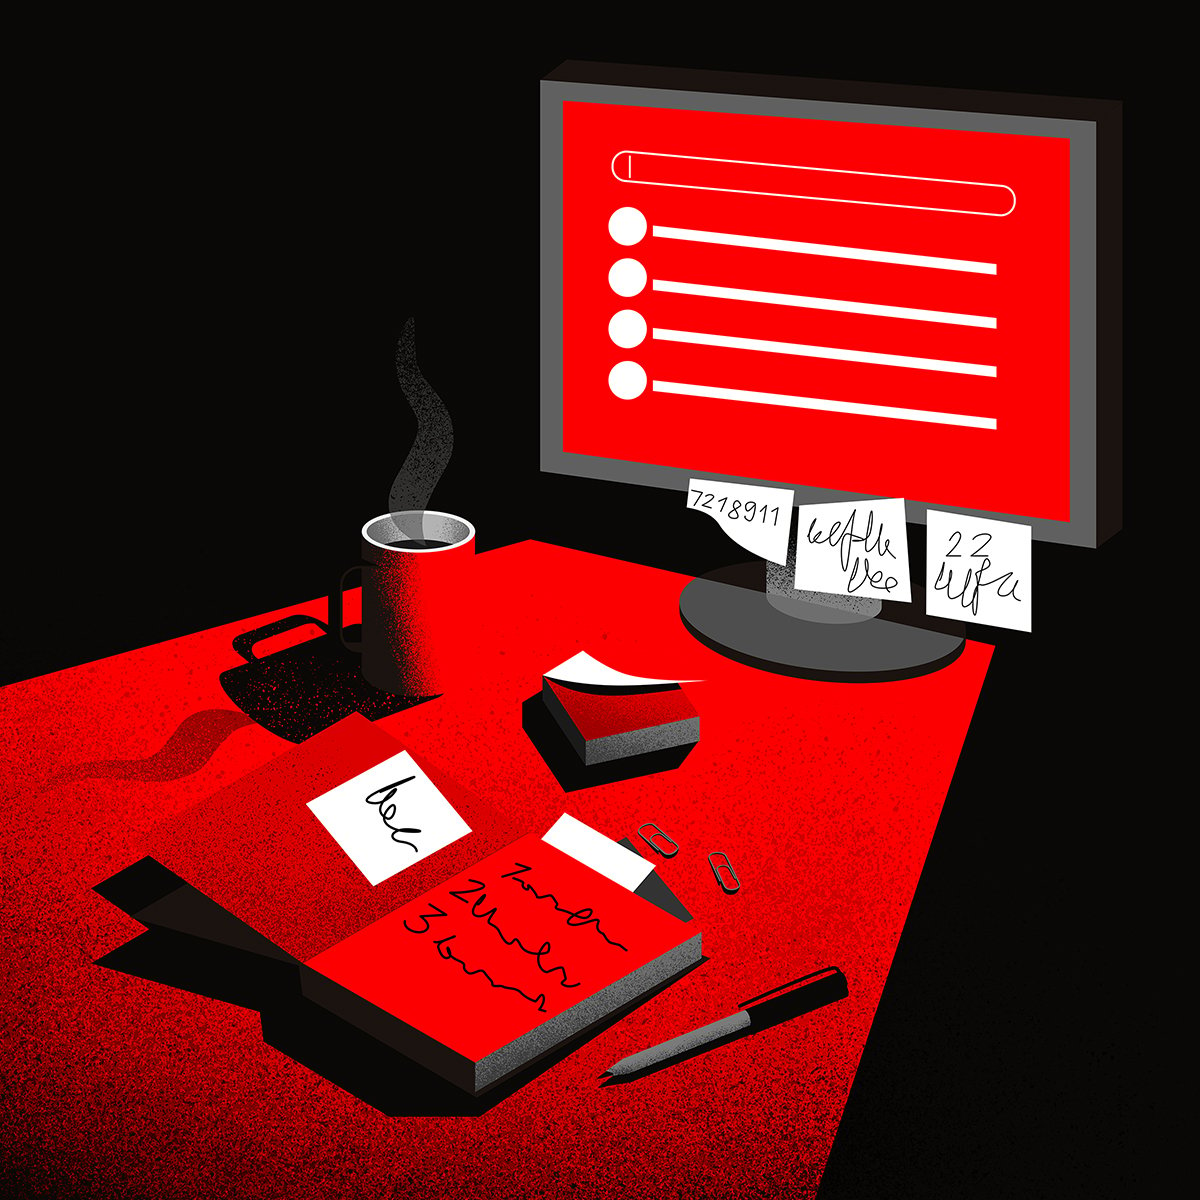 CrowdStrike Services Offers Incident Response Executive Preparation Checklist